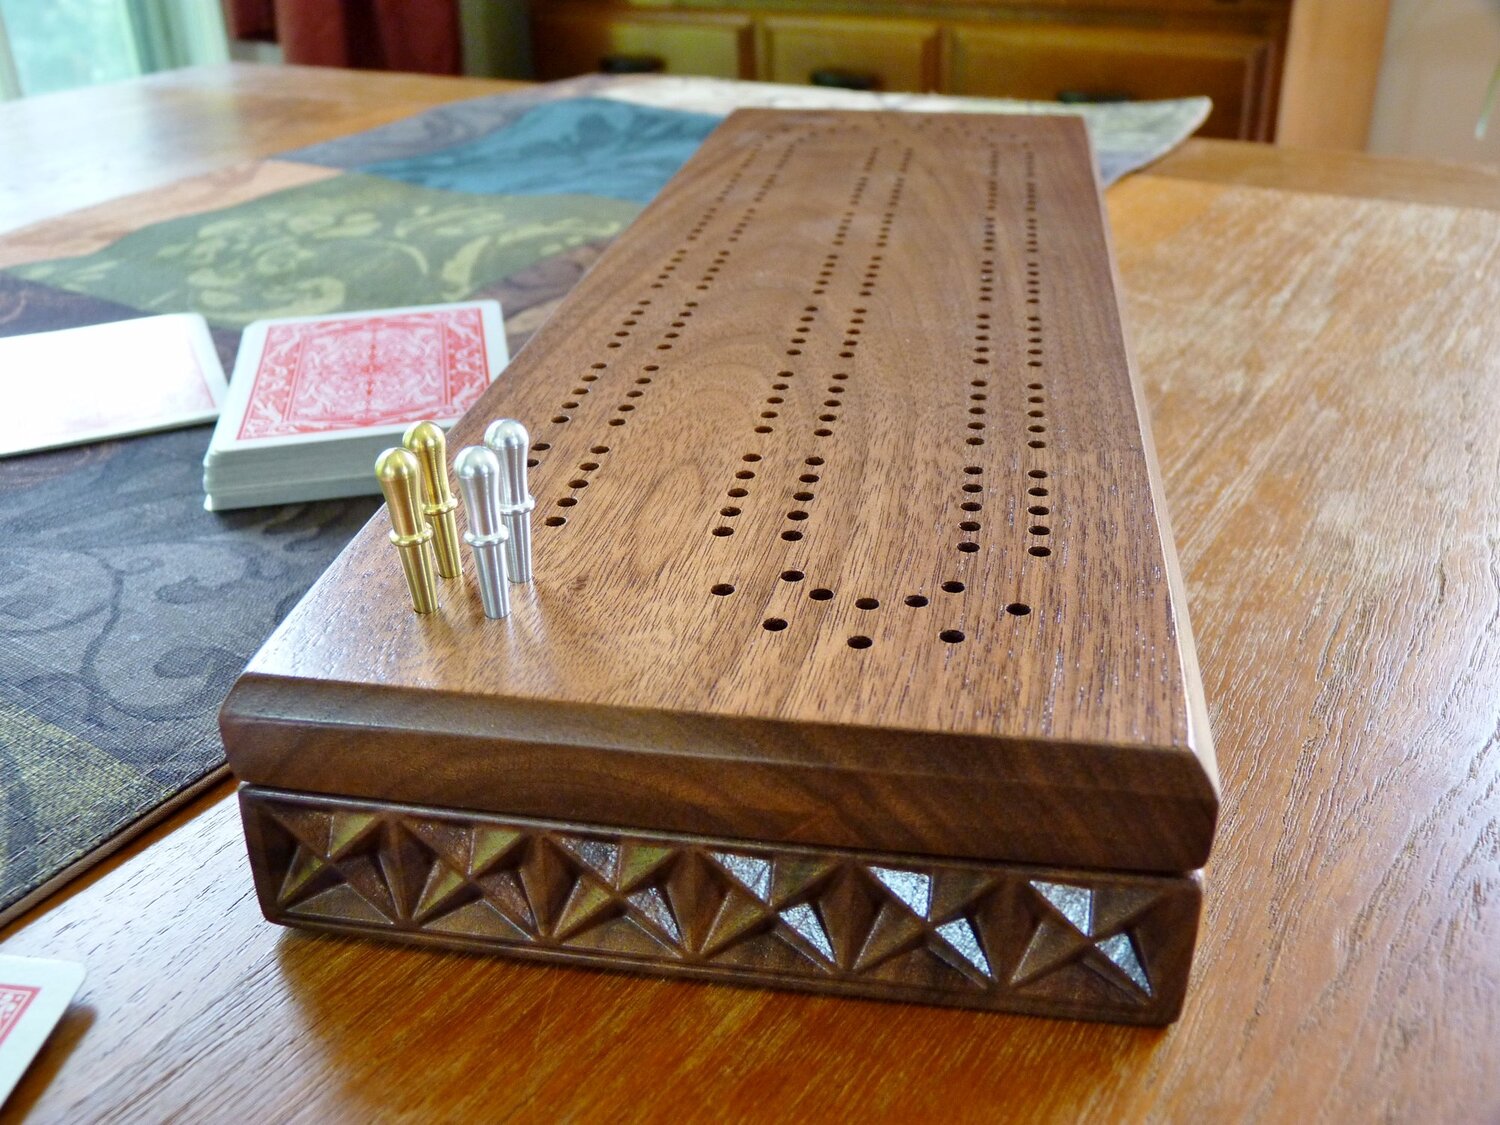 Cribbage rules